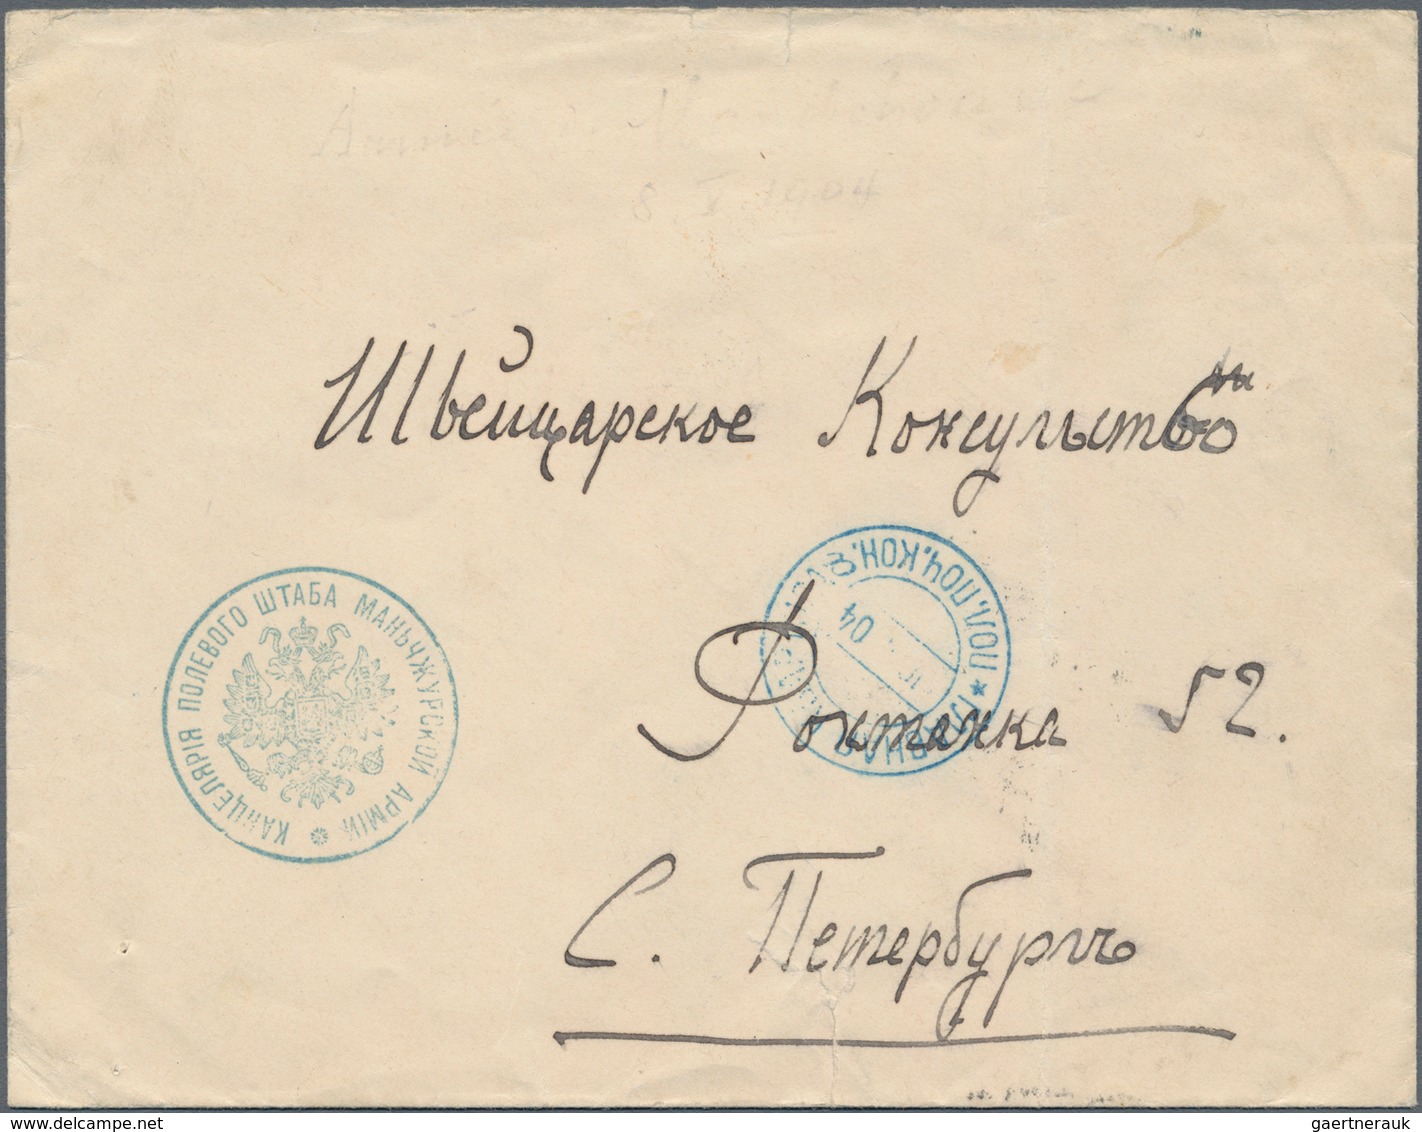 Russische Post In China: 10.04.1904 Russo-Japanese War Cover From HEADQUARTERS FIELD POST OFFICE To - Chine